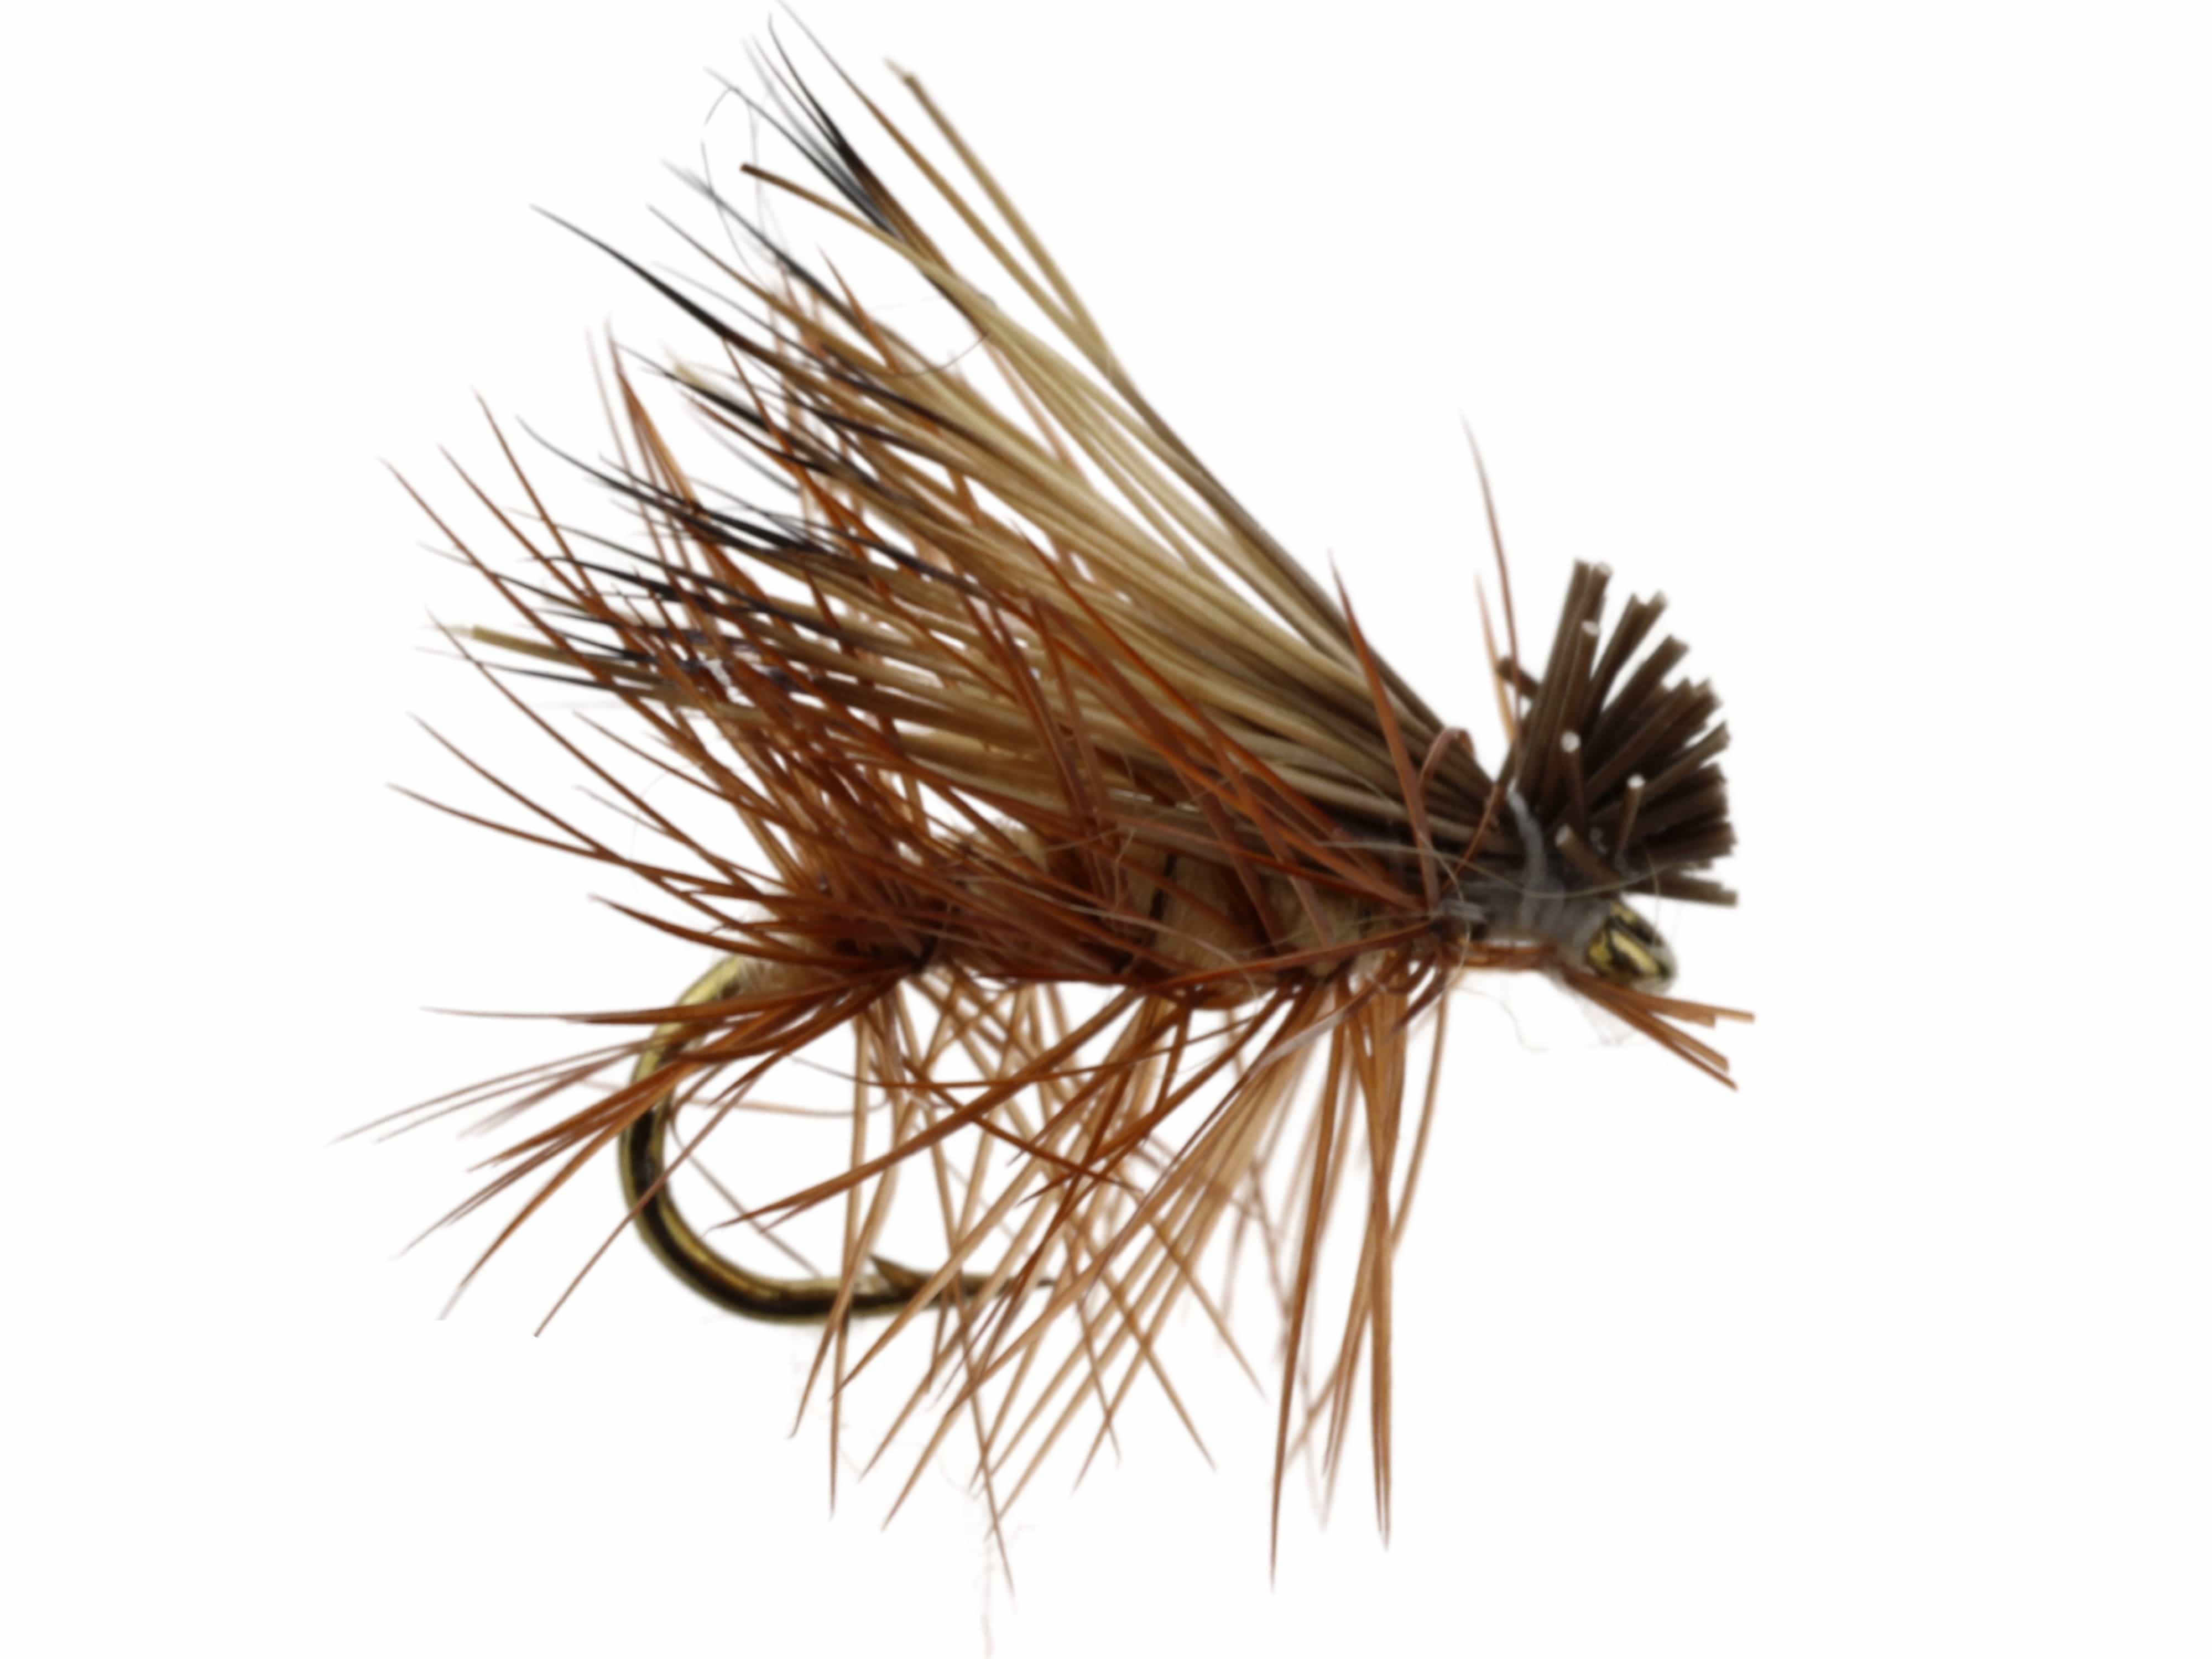 Wild Water Fly Fishing Fly Tying Material Kit, Tan Caddis